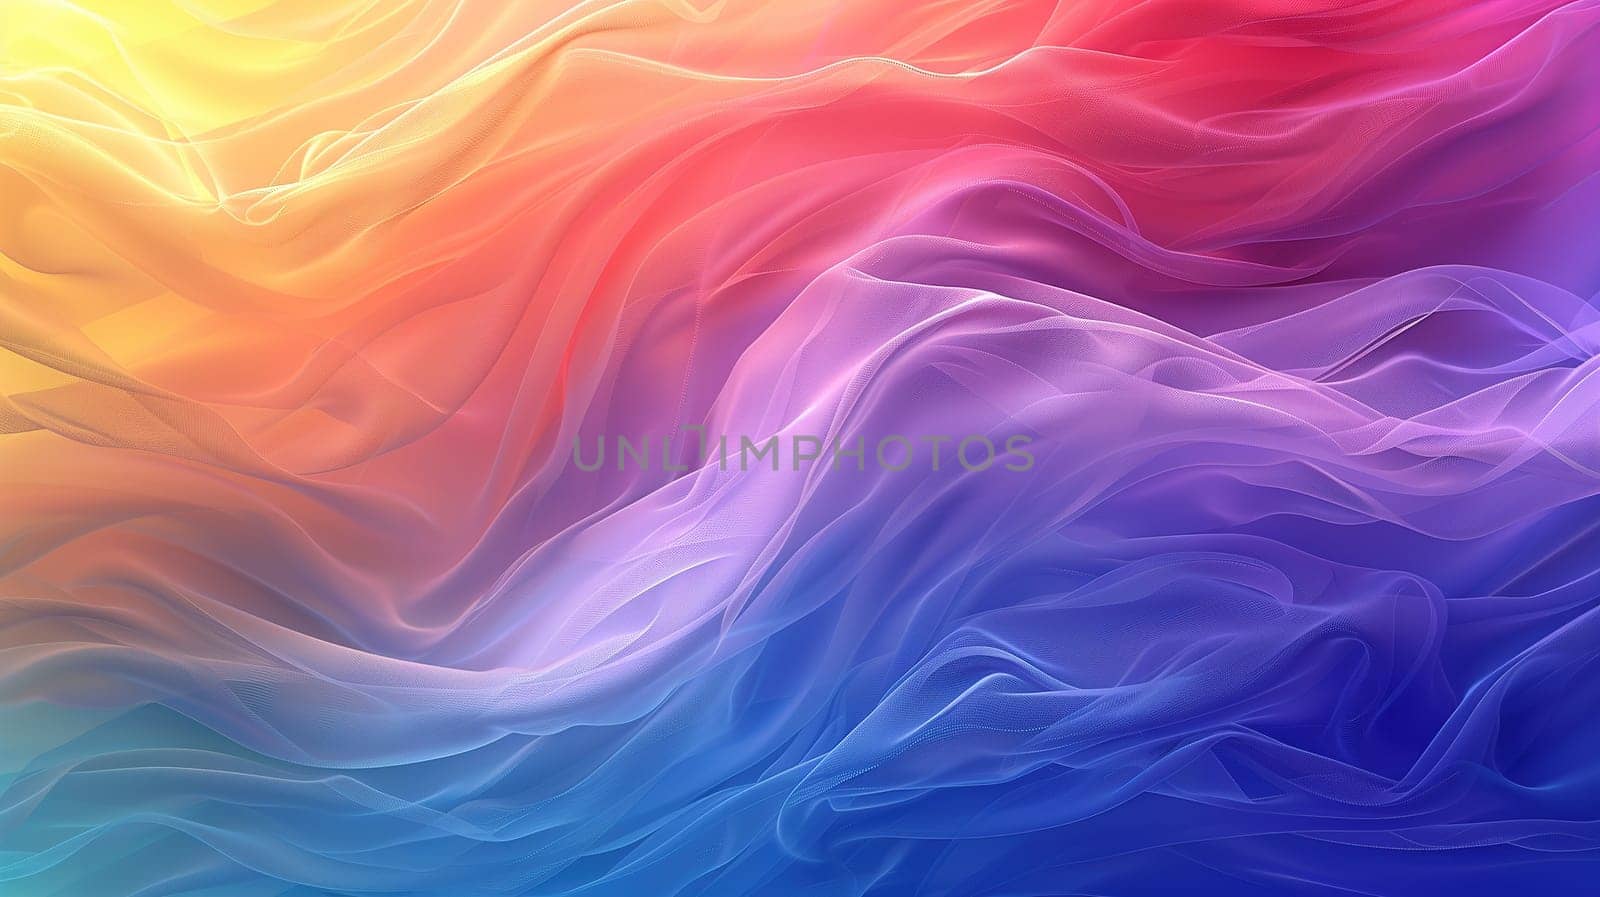 Vibrant Multicolored Background With Wavy Lines by TRMK